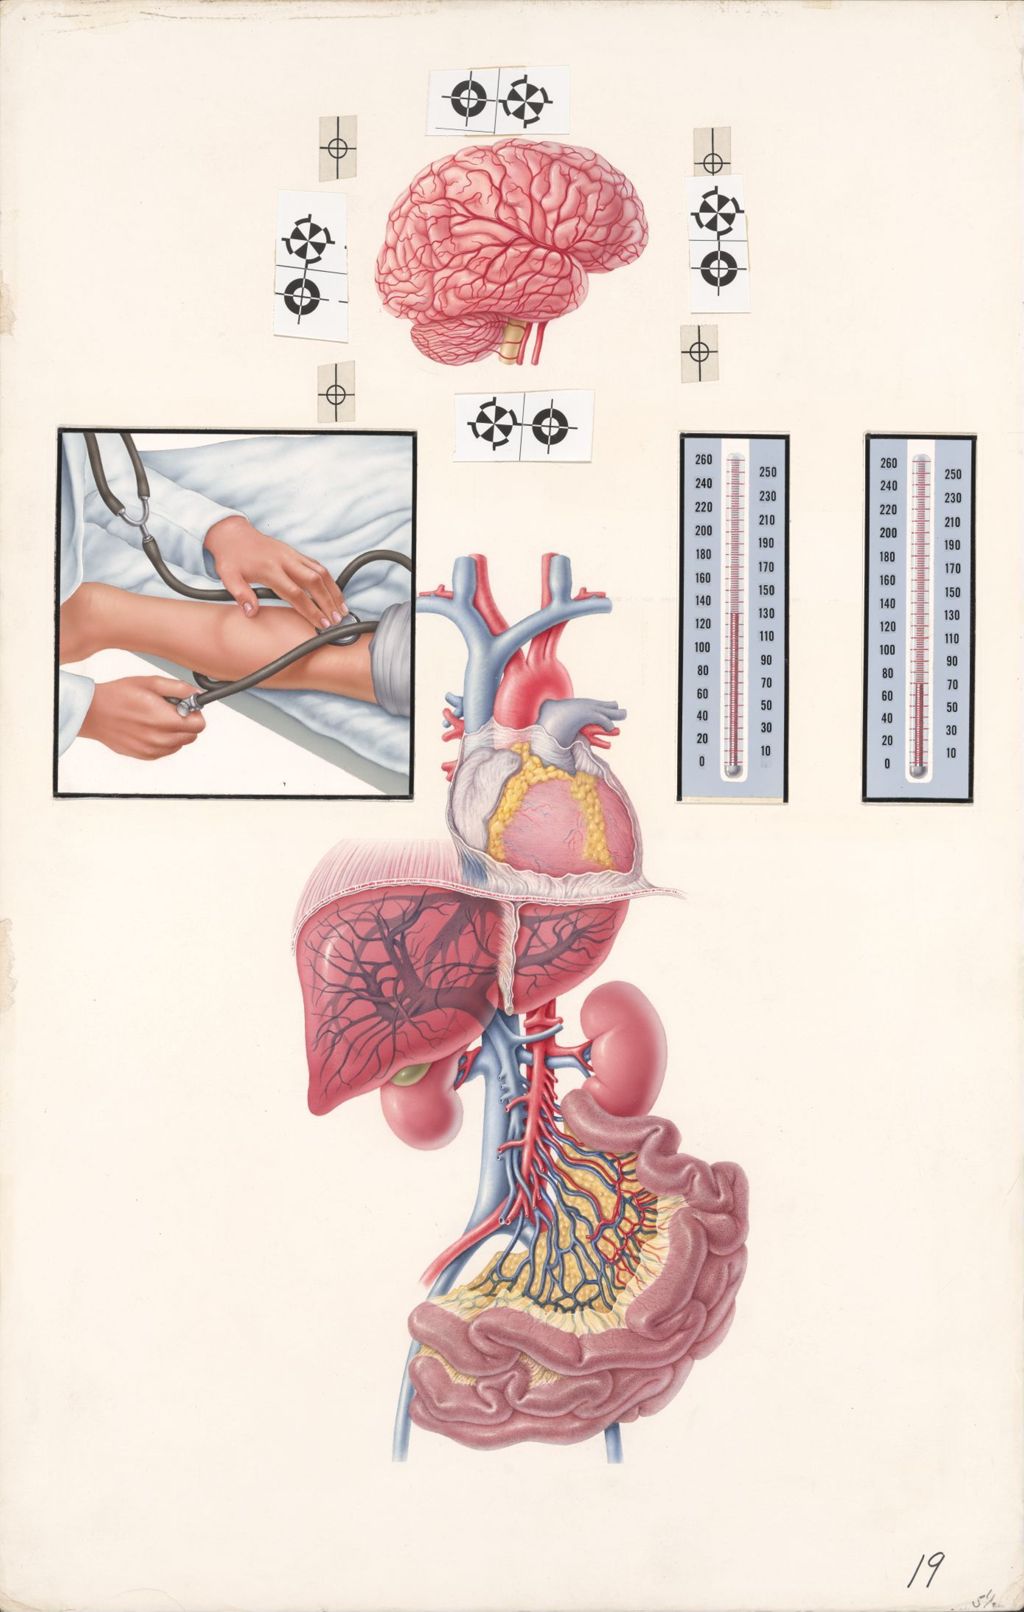 Miniature of Medical Profiles, Aldomet, Blood Flow to Vital Organs in Hypotension, Plate I